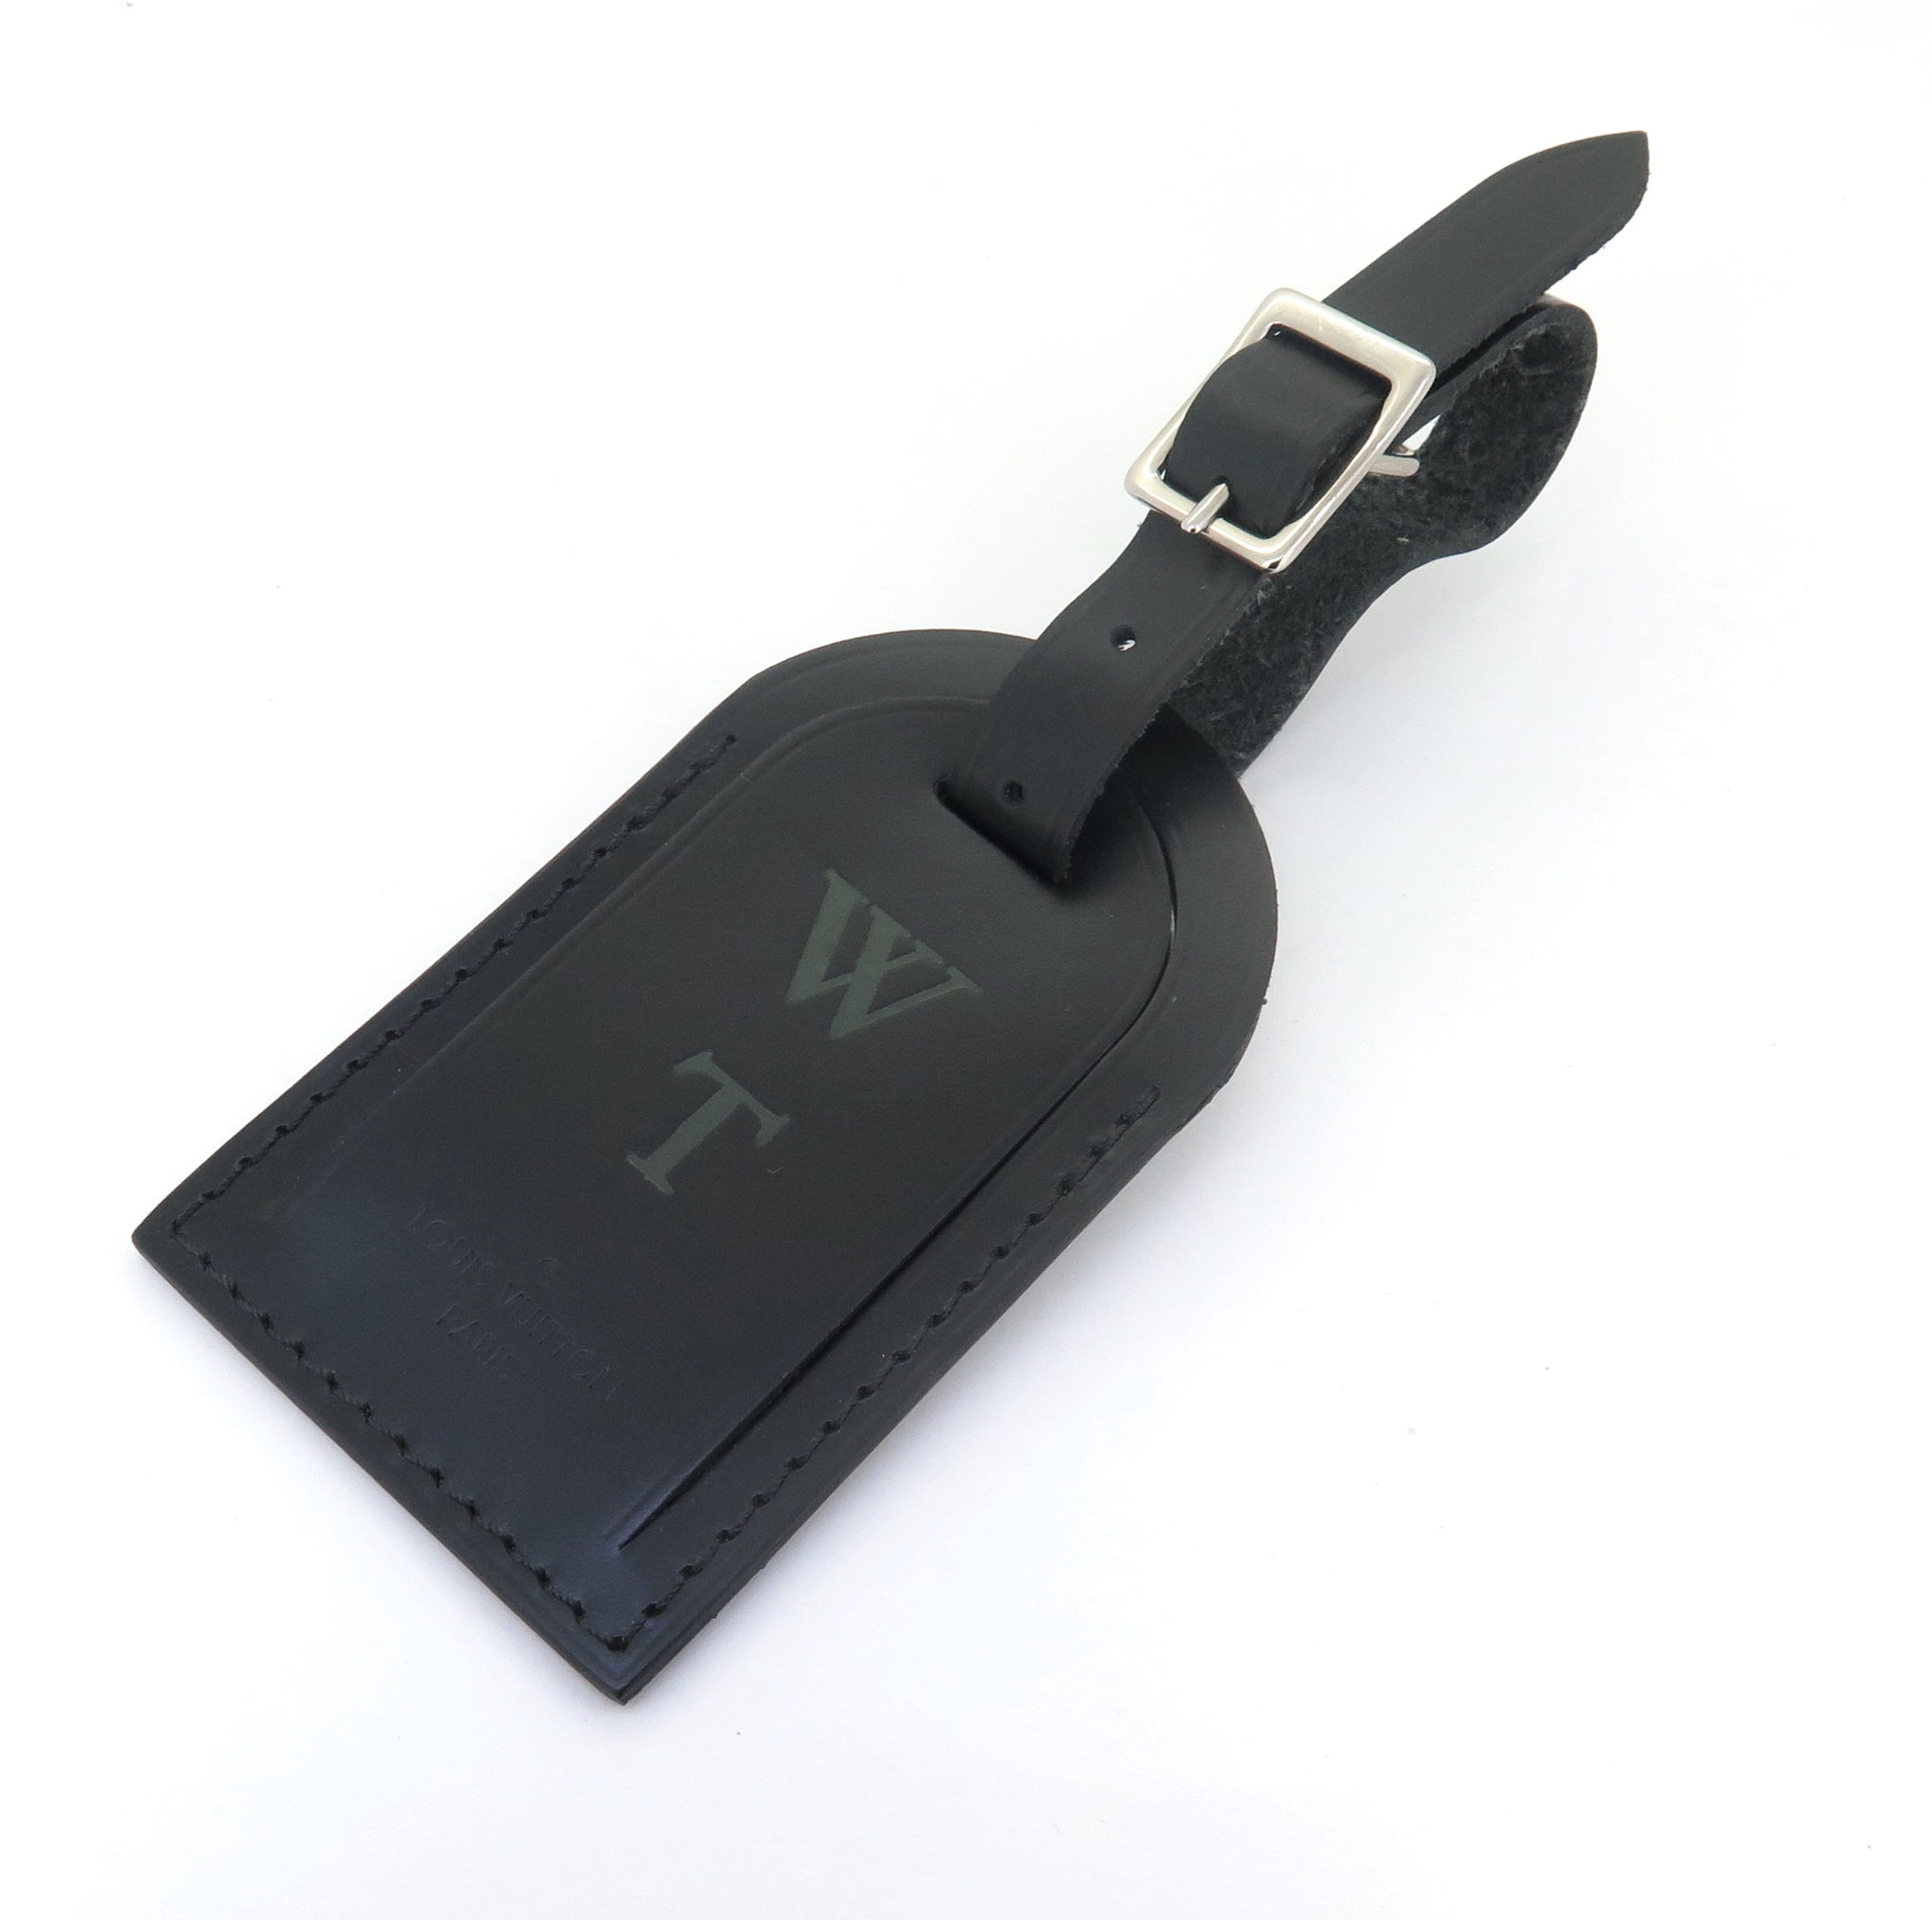 Louis Vuitton Monogrammed Luggage Bag Identification Tag